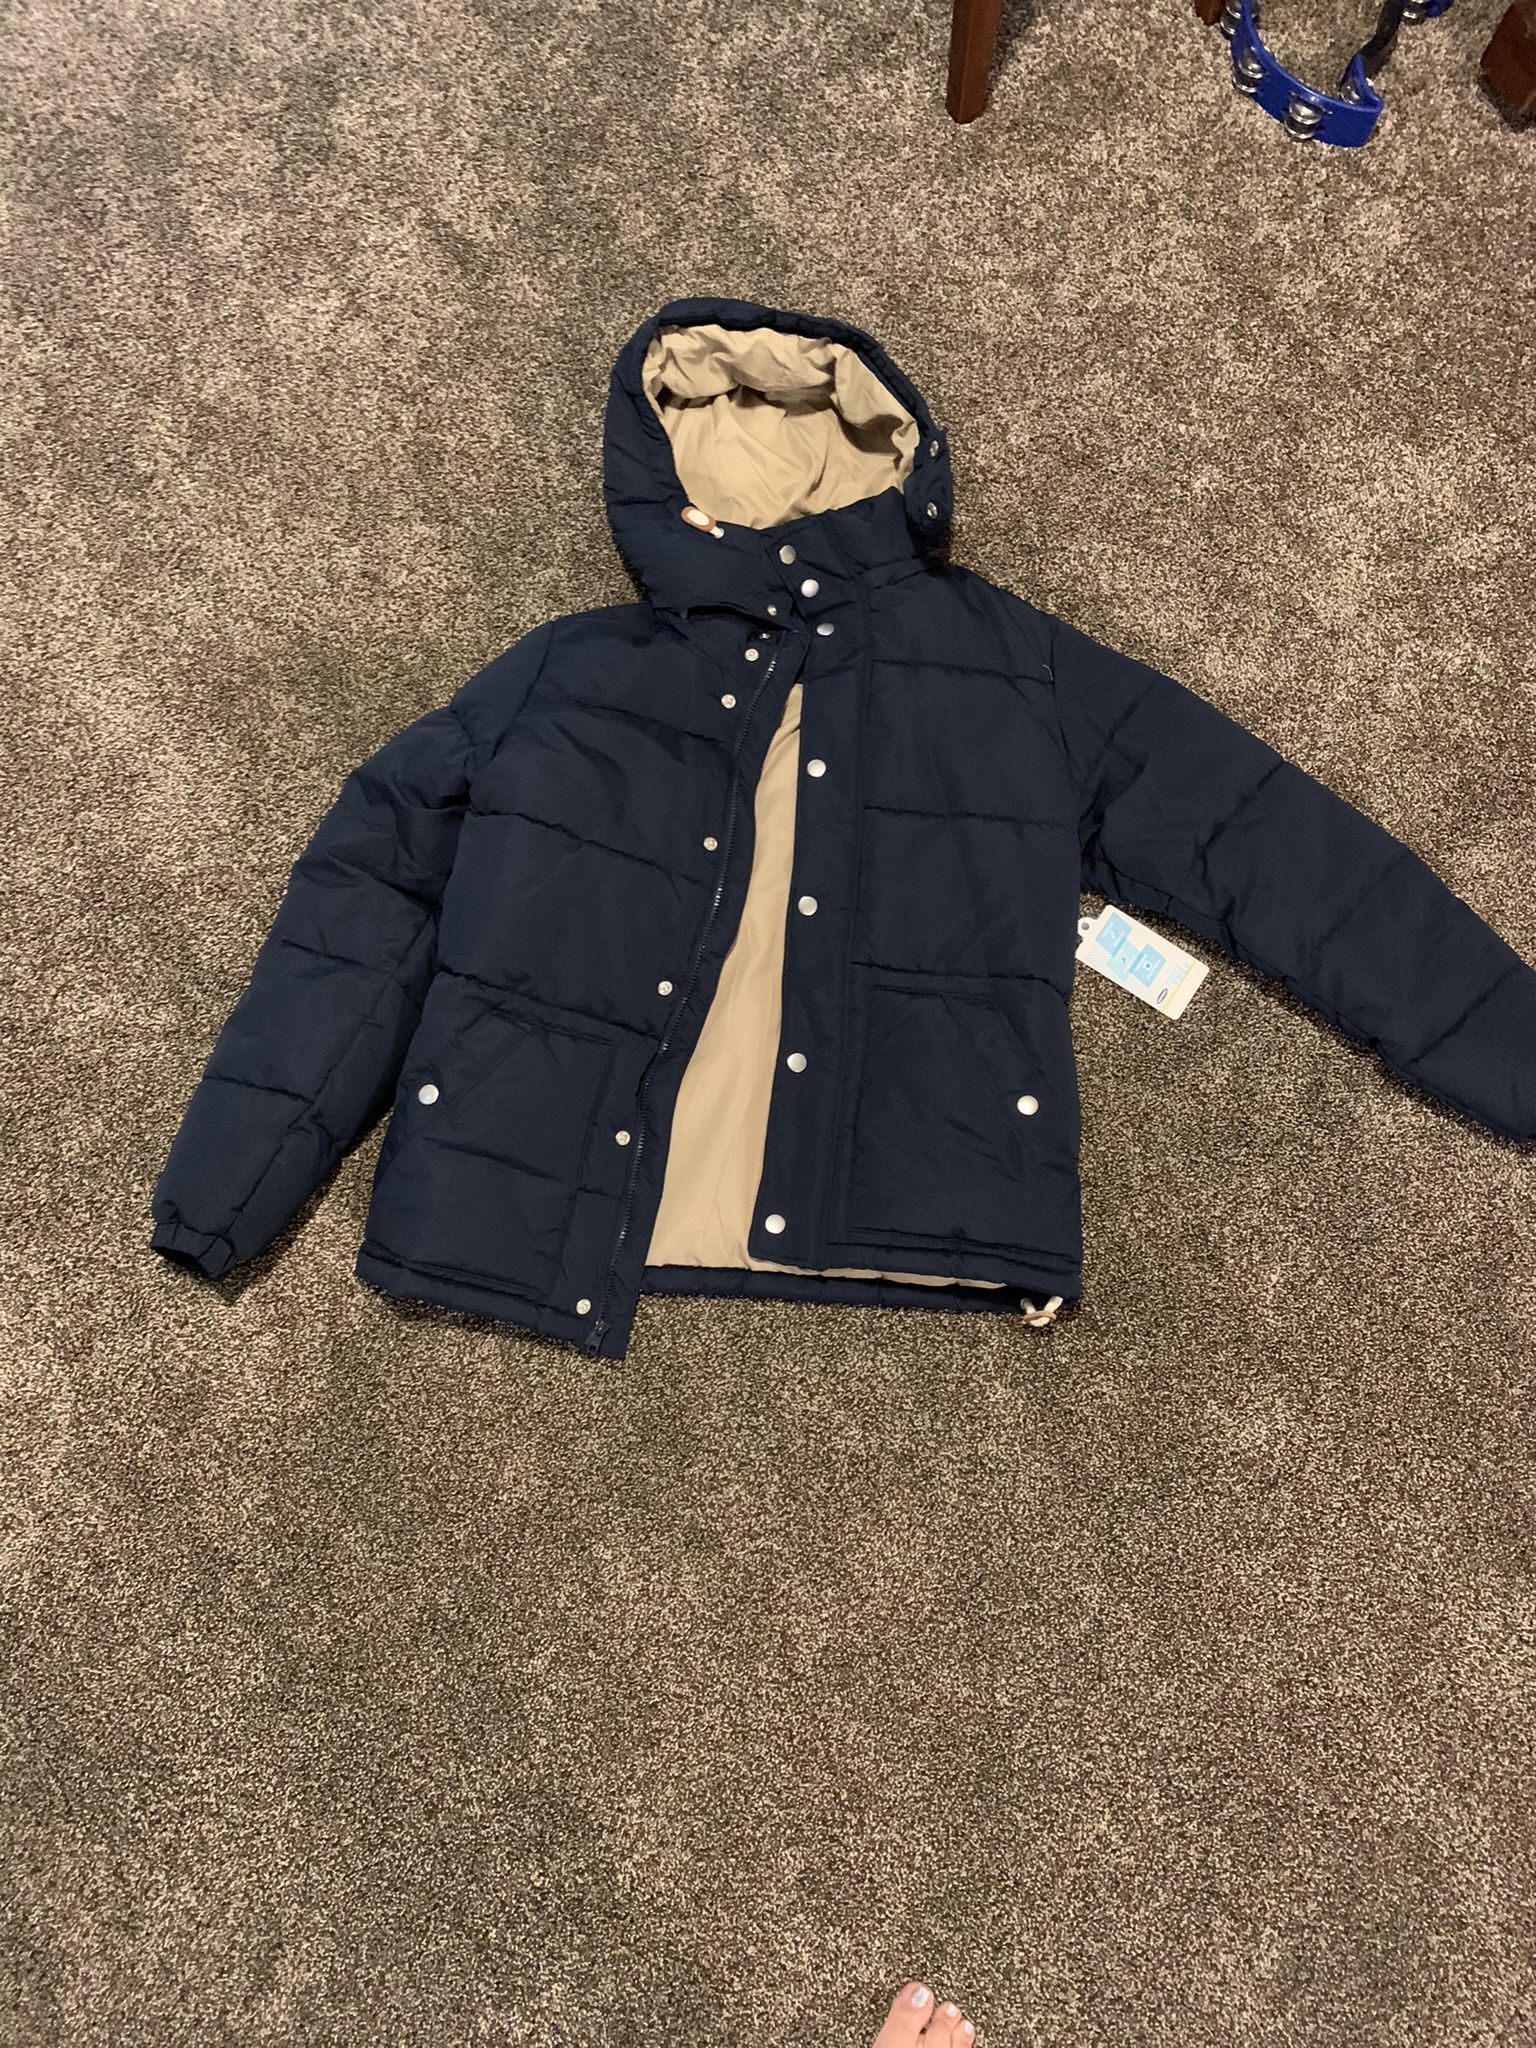 Old Navy Jacket With Tags 